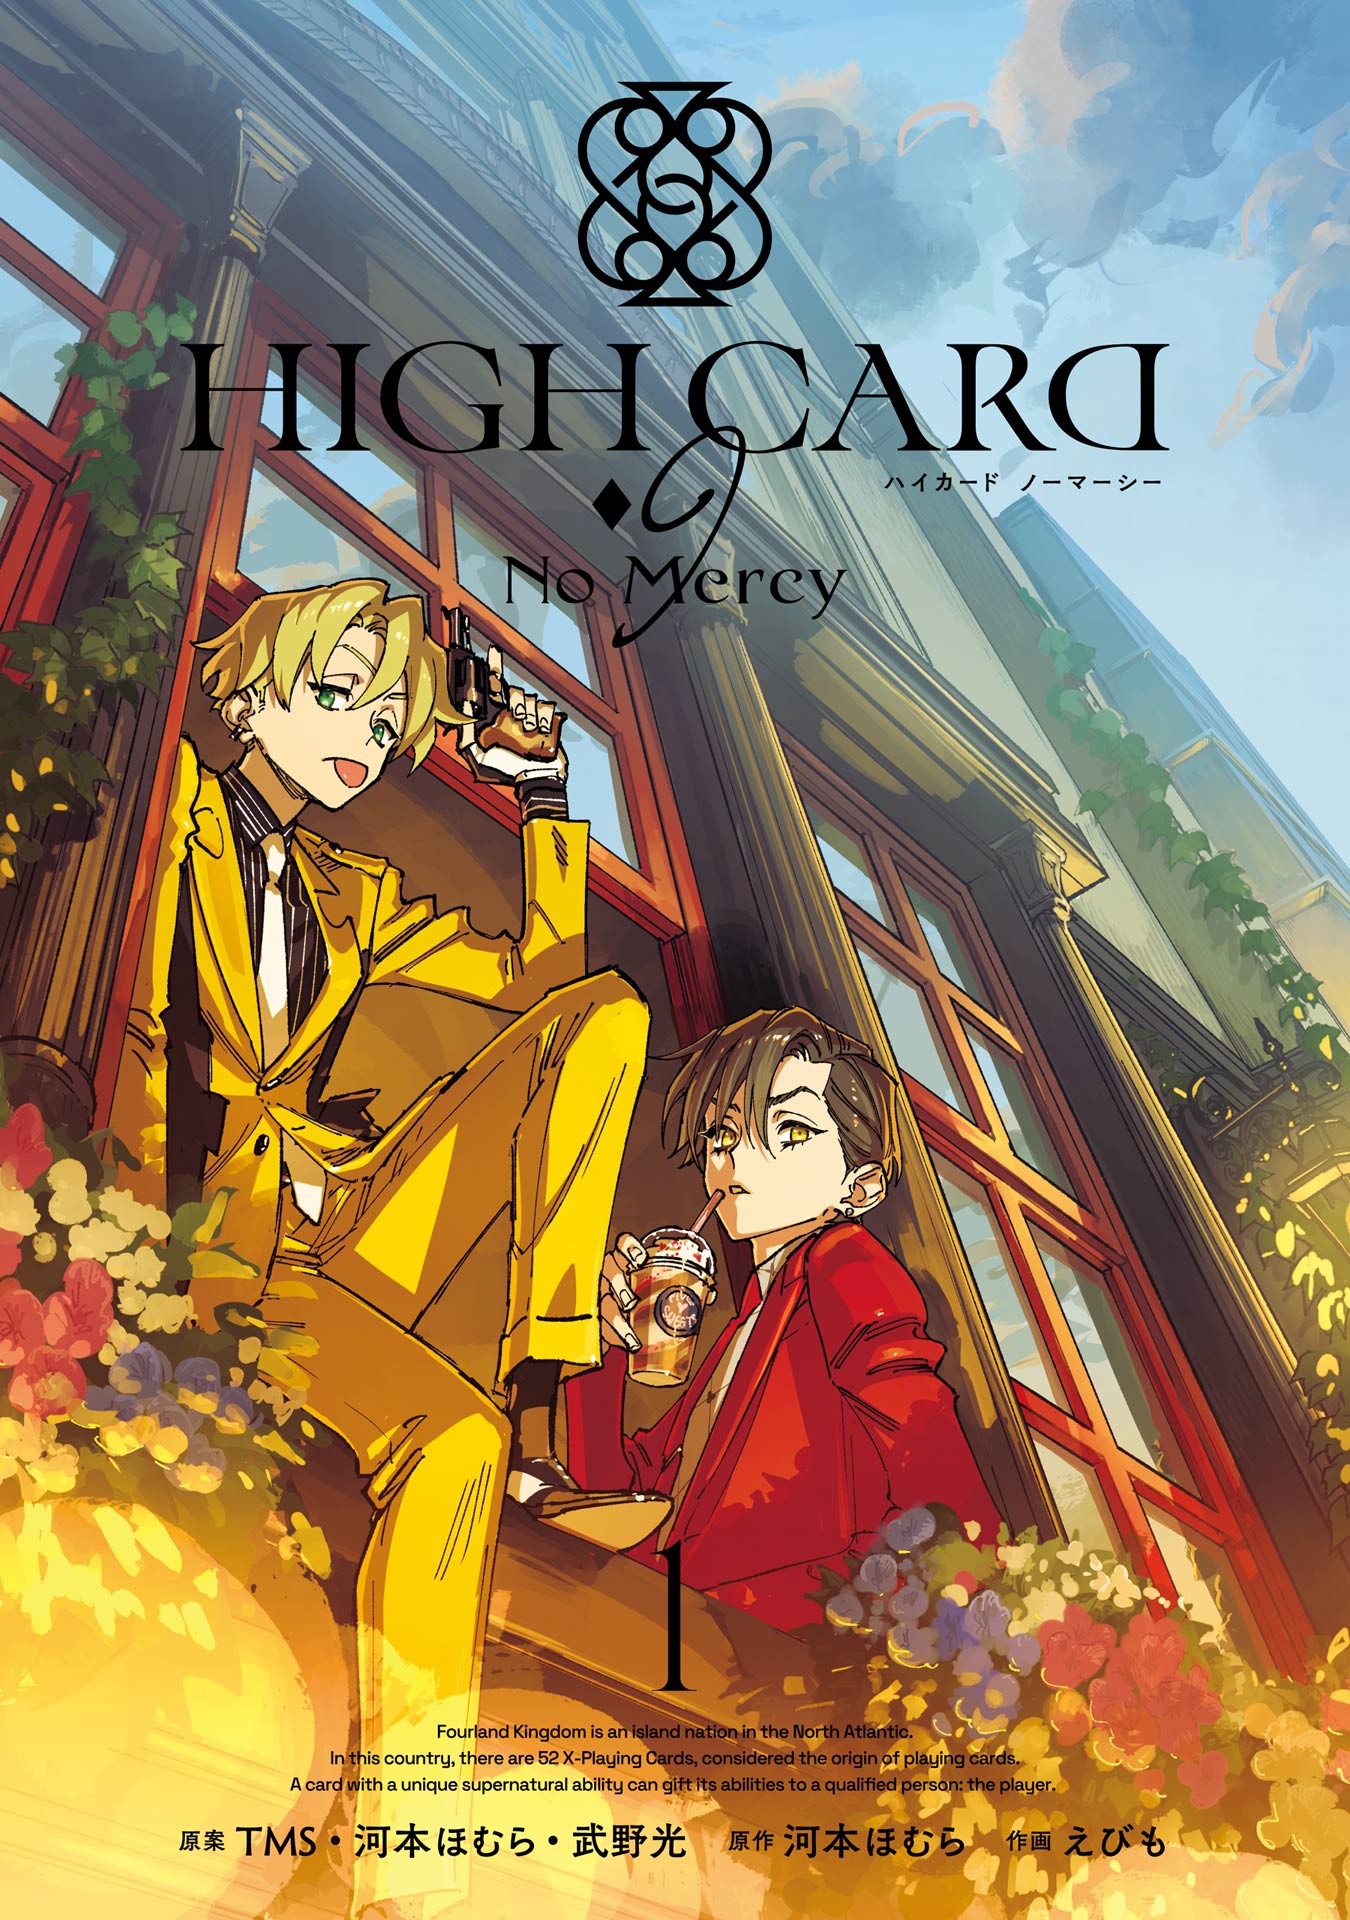 ーPlaying Cards × Supernatural Actionー“HIGH CARD” Anime to Be